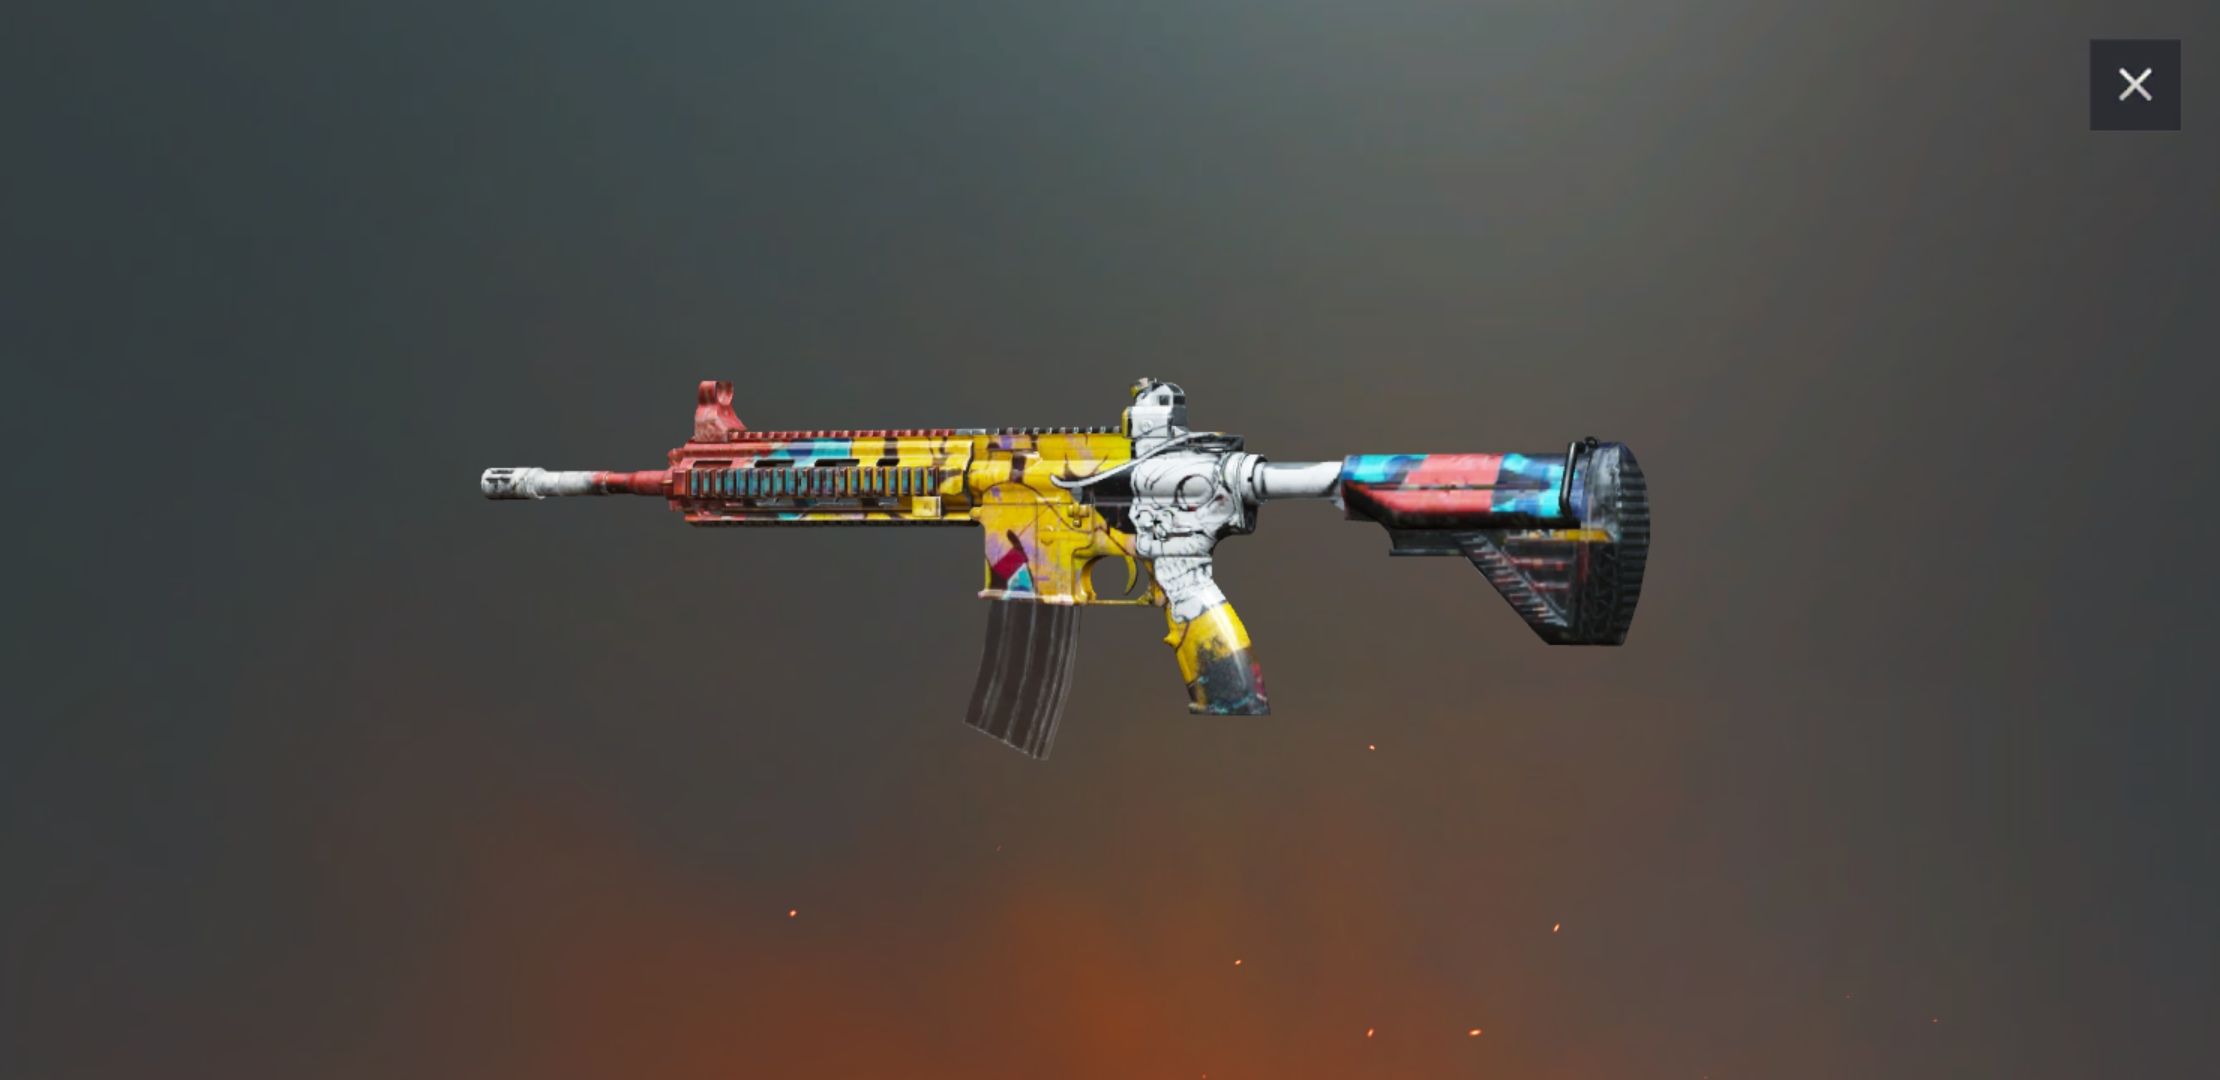 This is the Graffiti M4. Probably the best skin for the gun in my